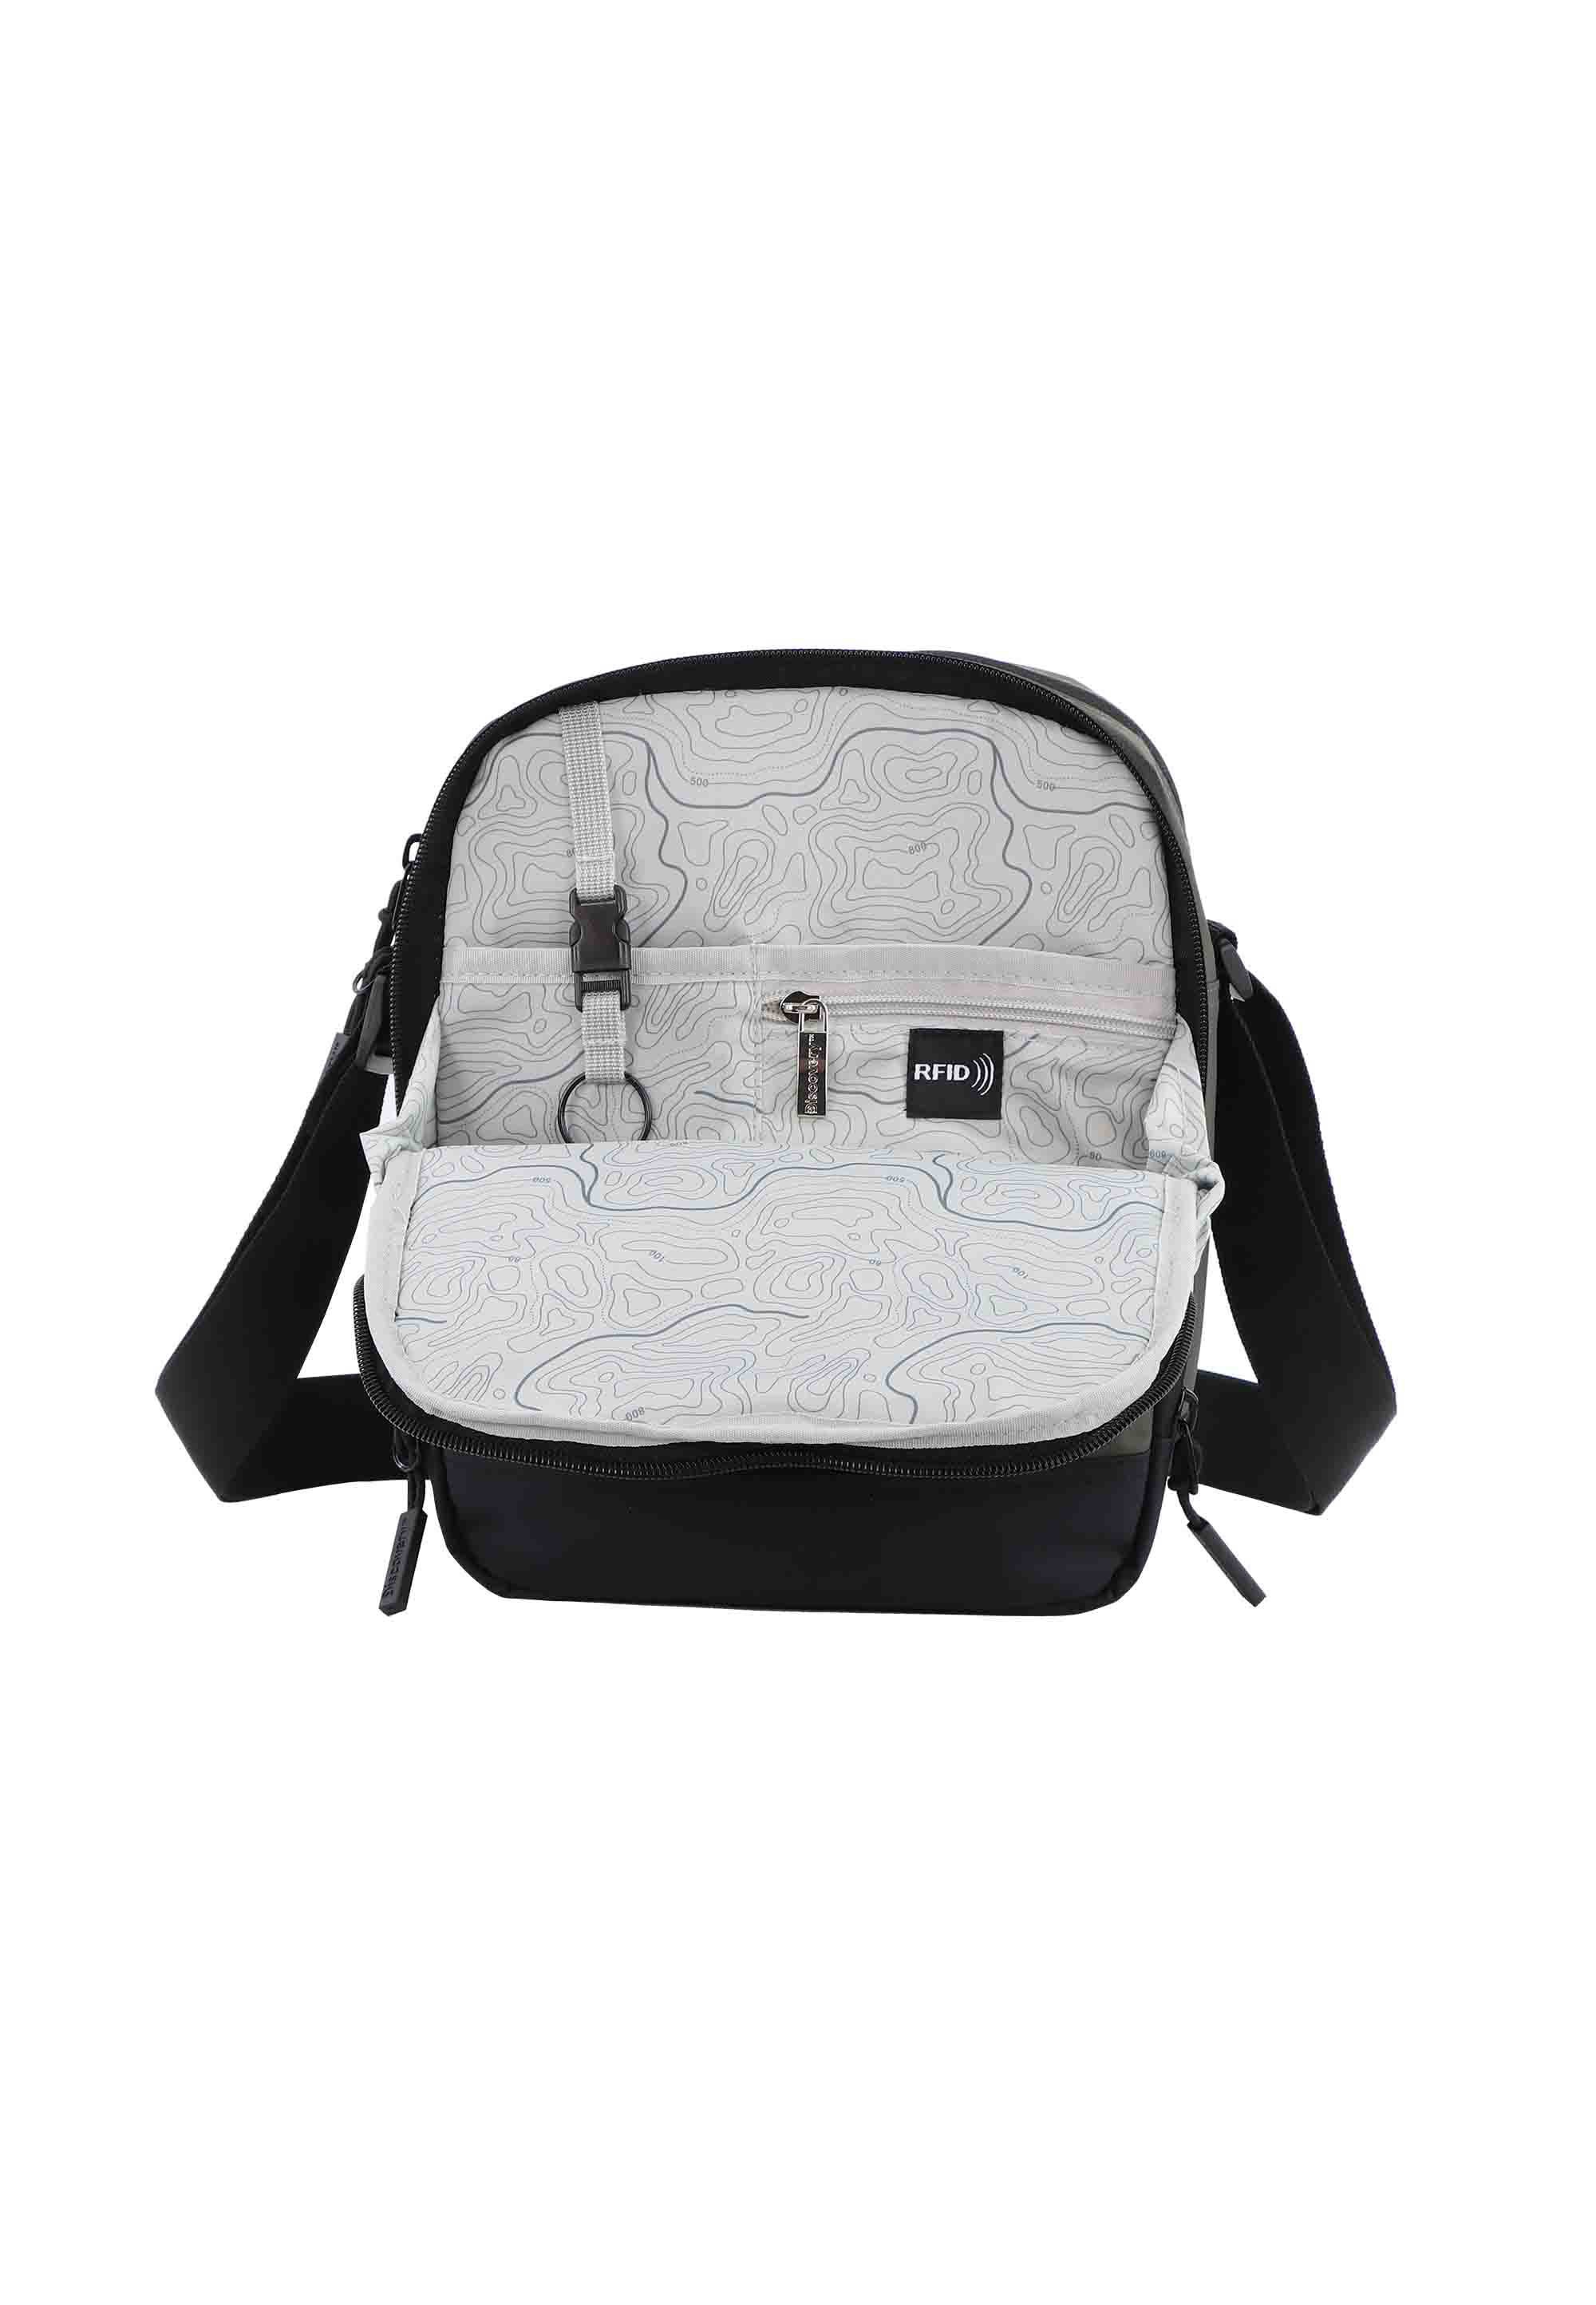 Discovery Laptoptasche »Shield«, mit rPet Polyester-Material